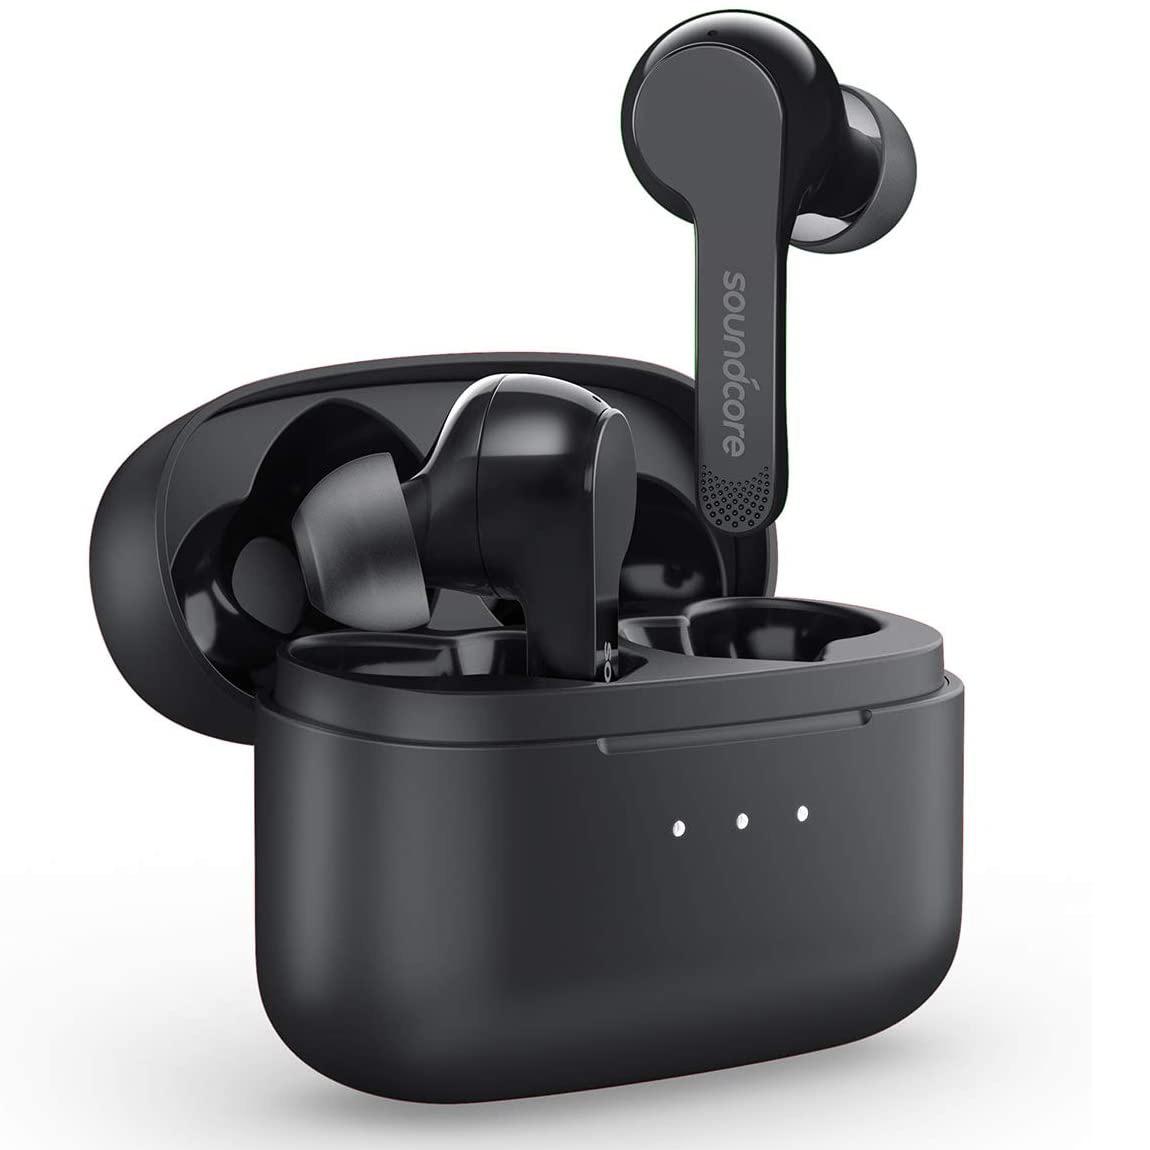 Anker Soundcore Liberty Air X True Wireless Earbuds for $17.99 Shipped